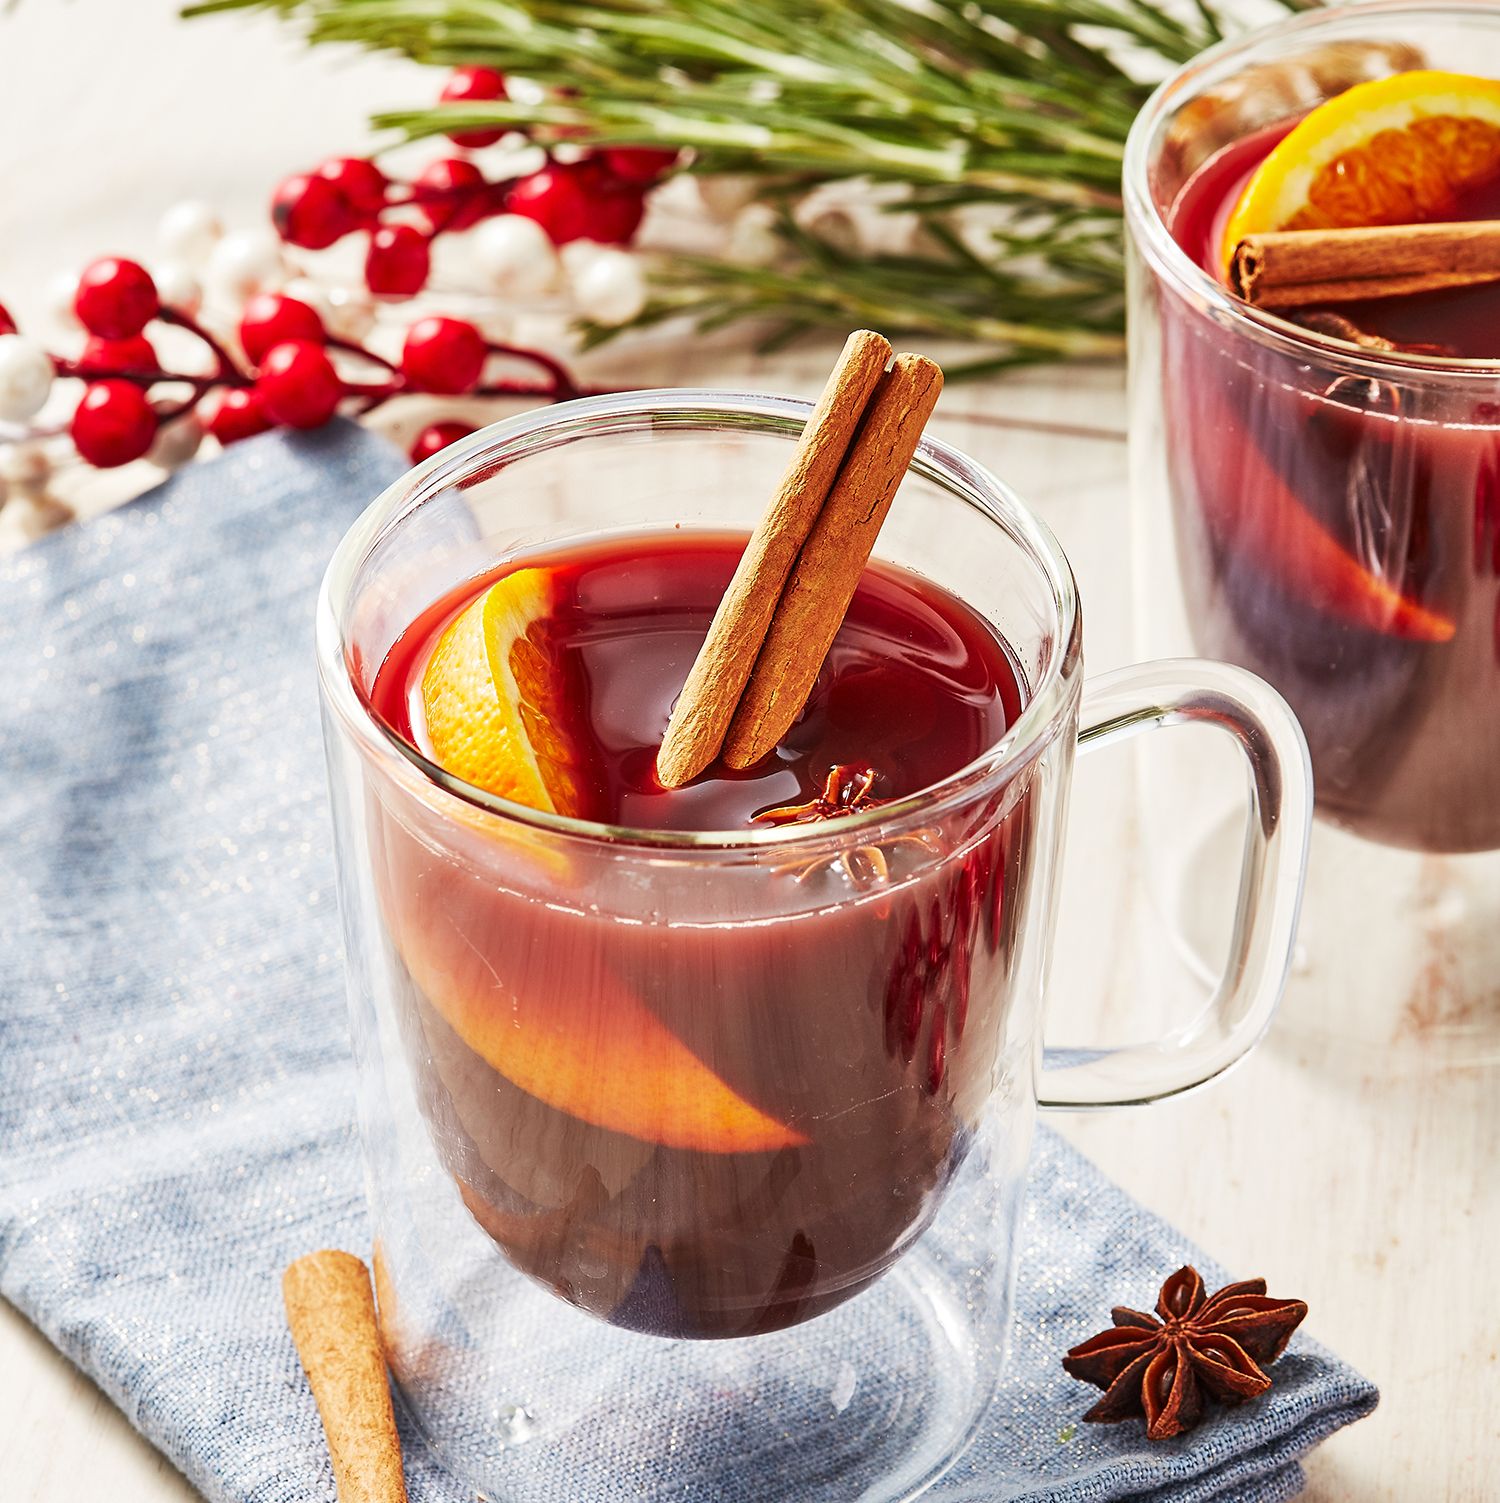 Non-alcoholic mulled wine